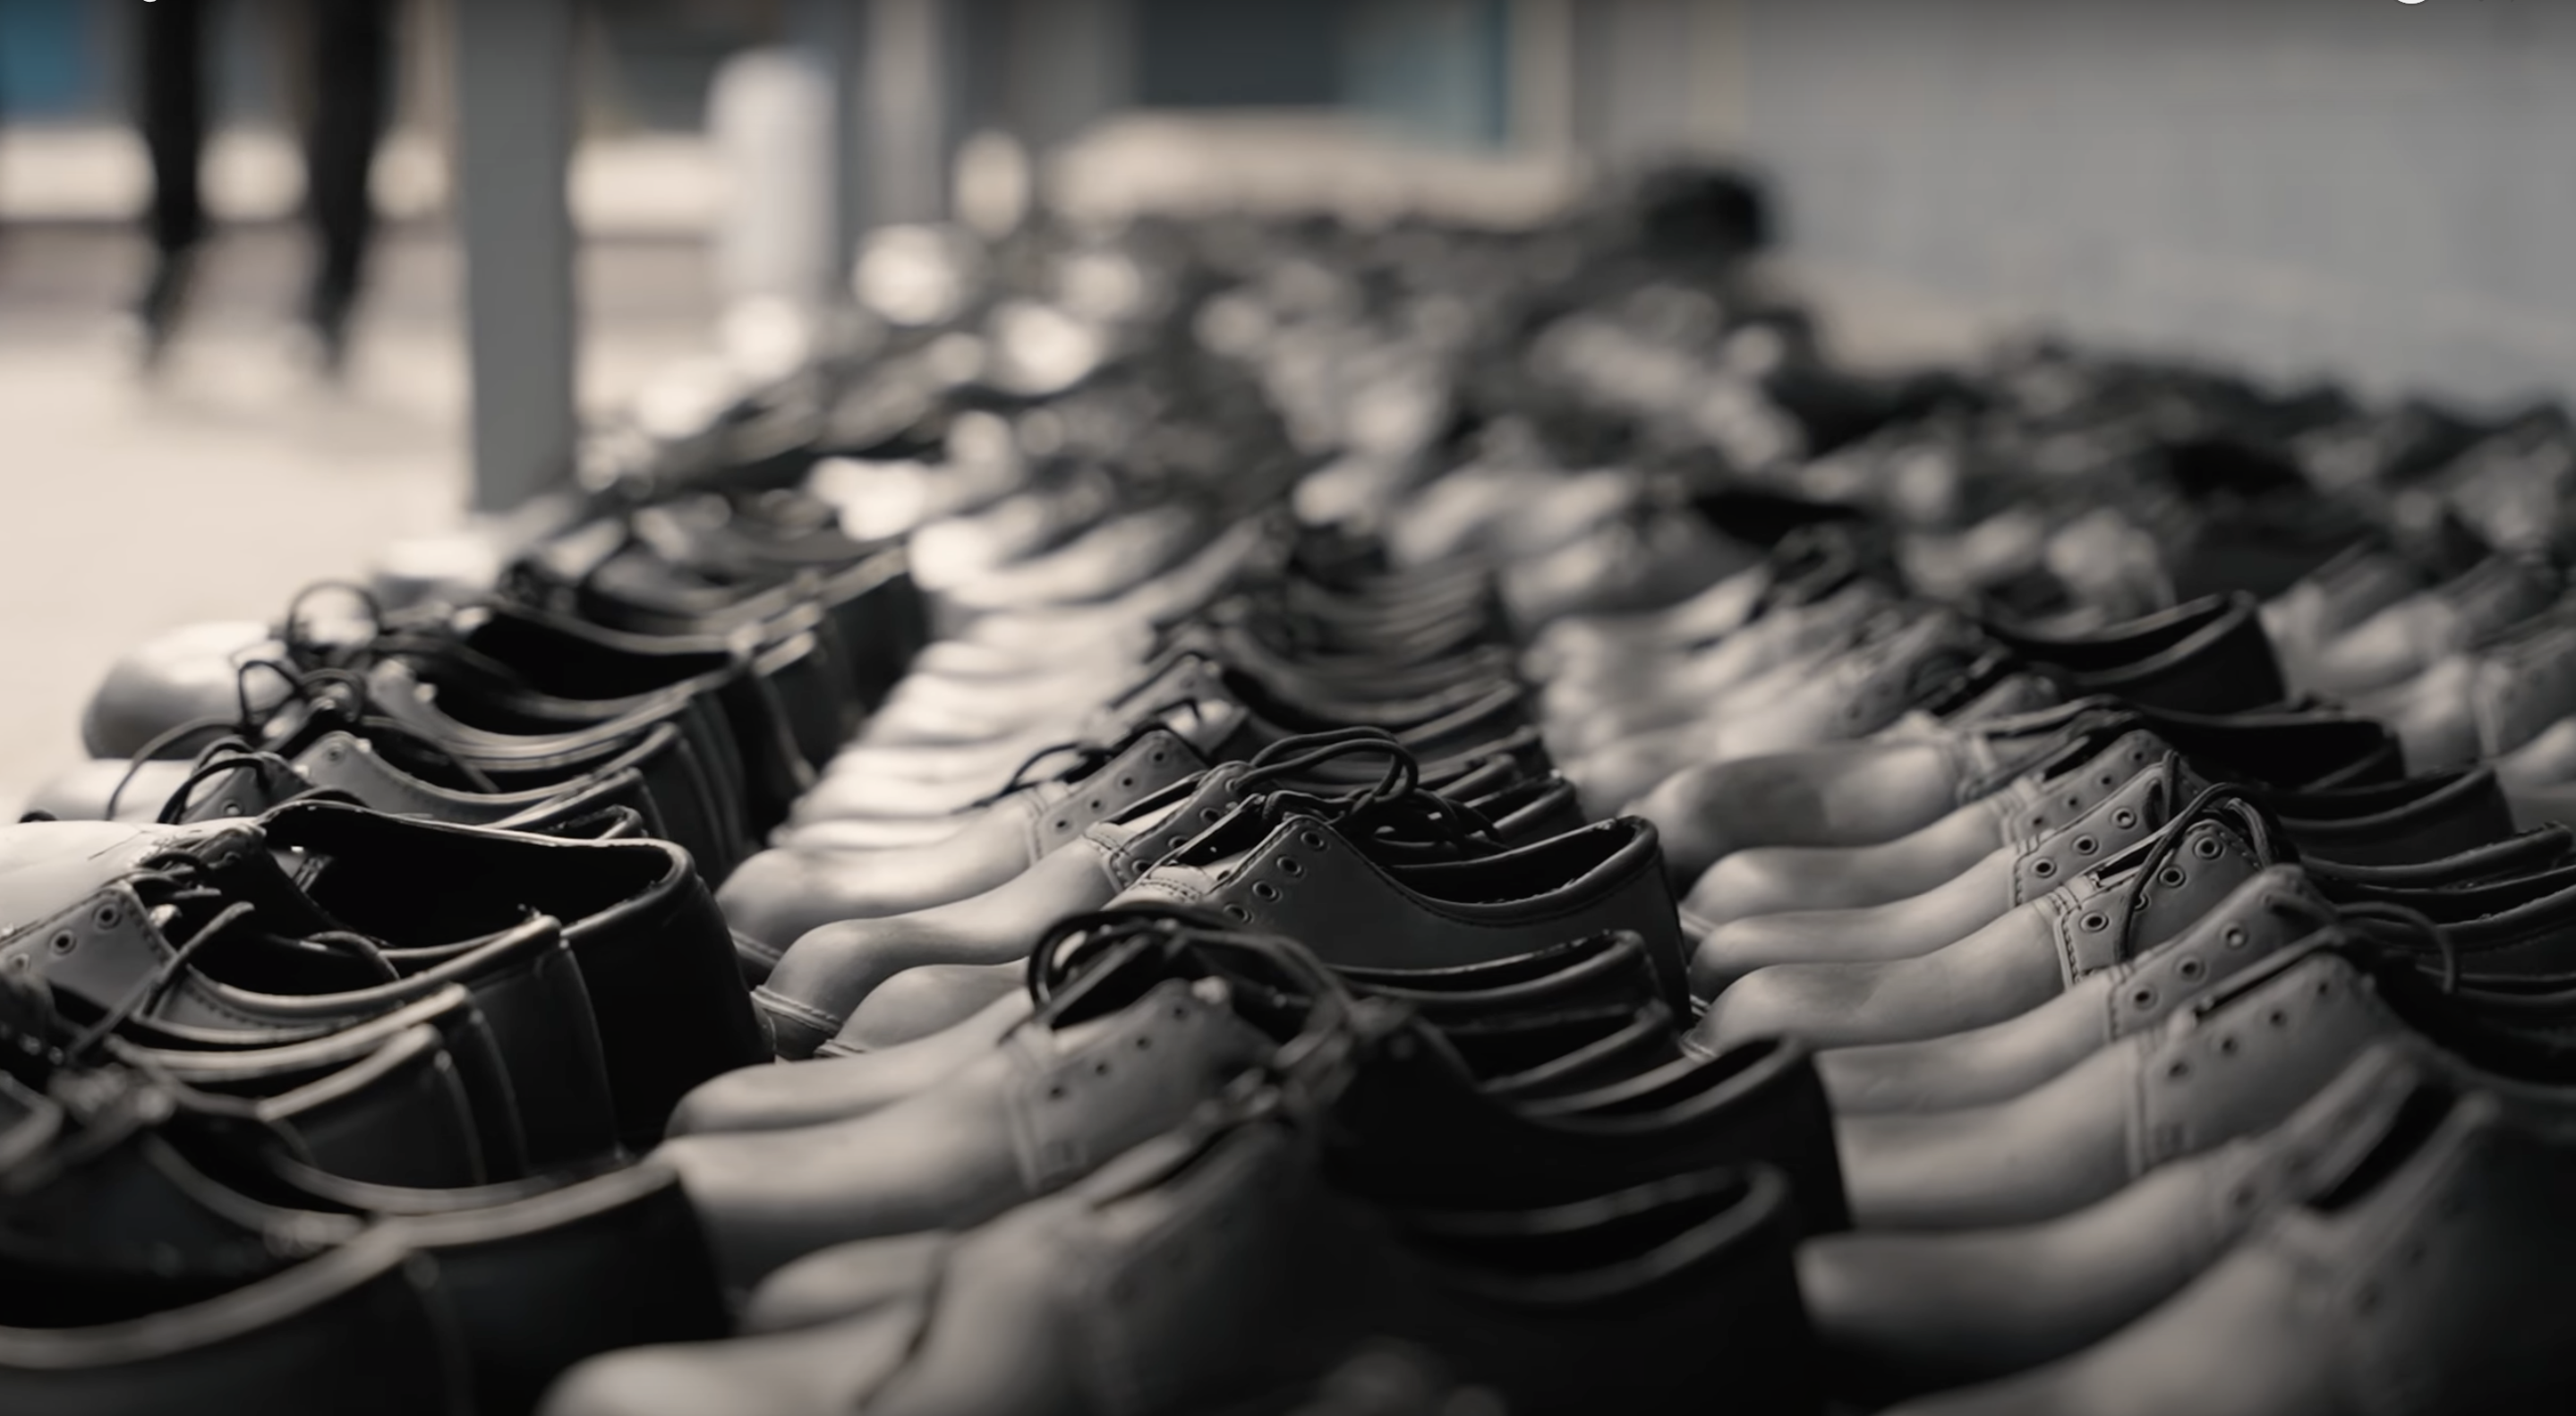 close-up on rows of shoes